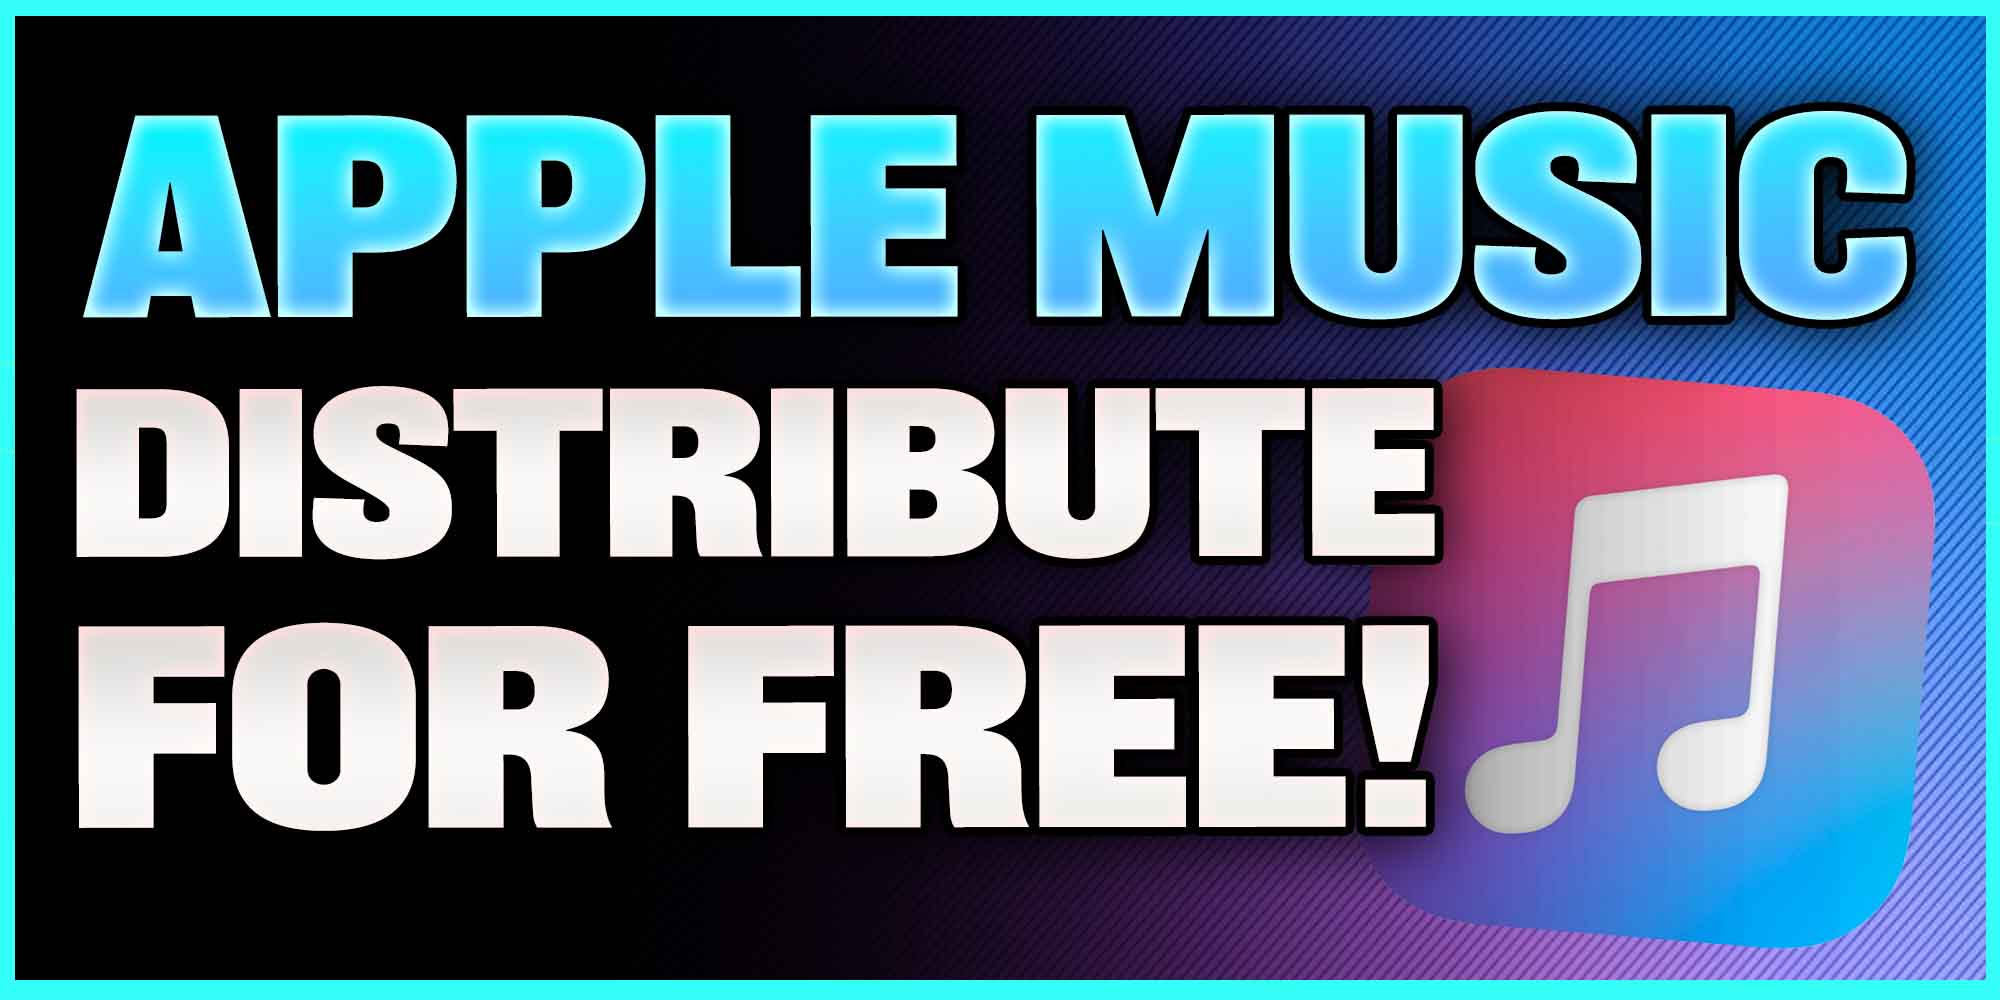 Distribute Your Music To Apple Music For Free